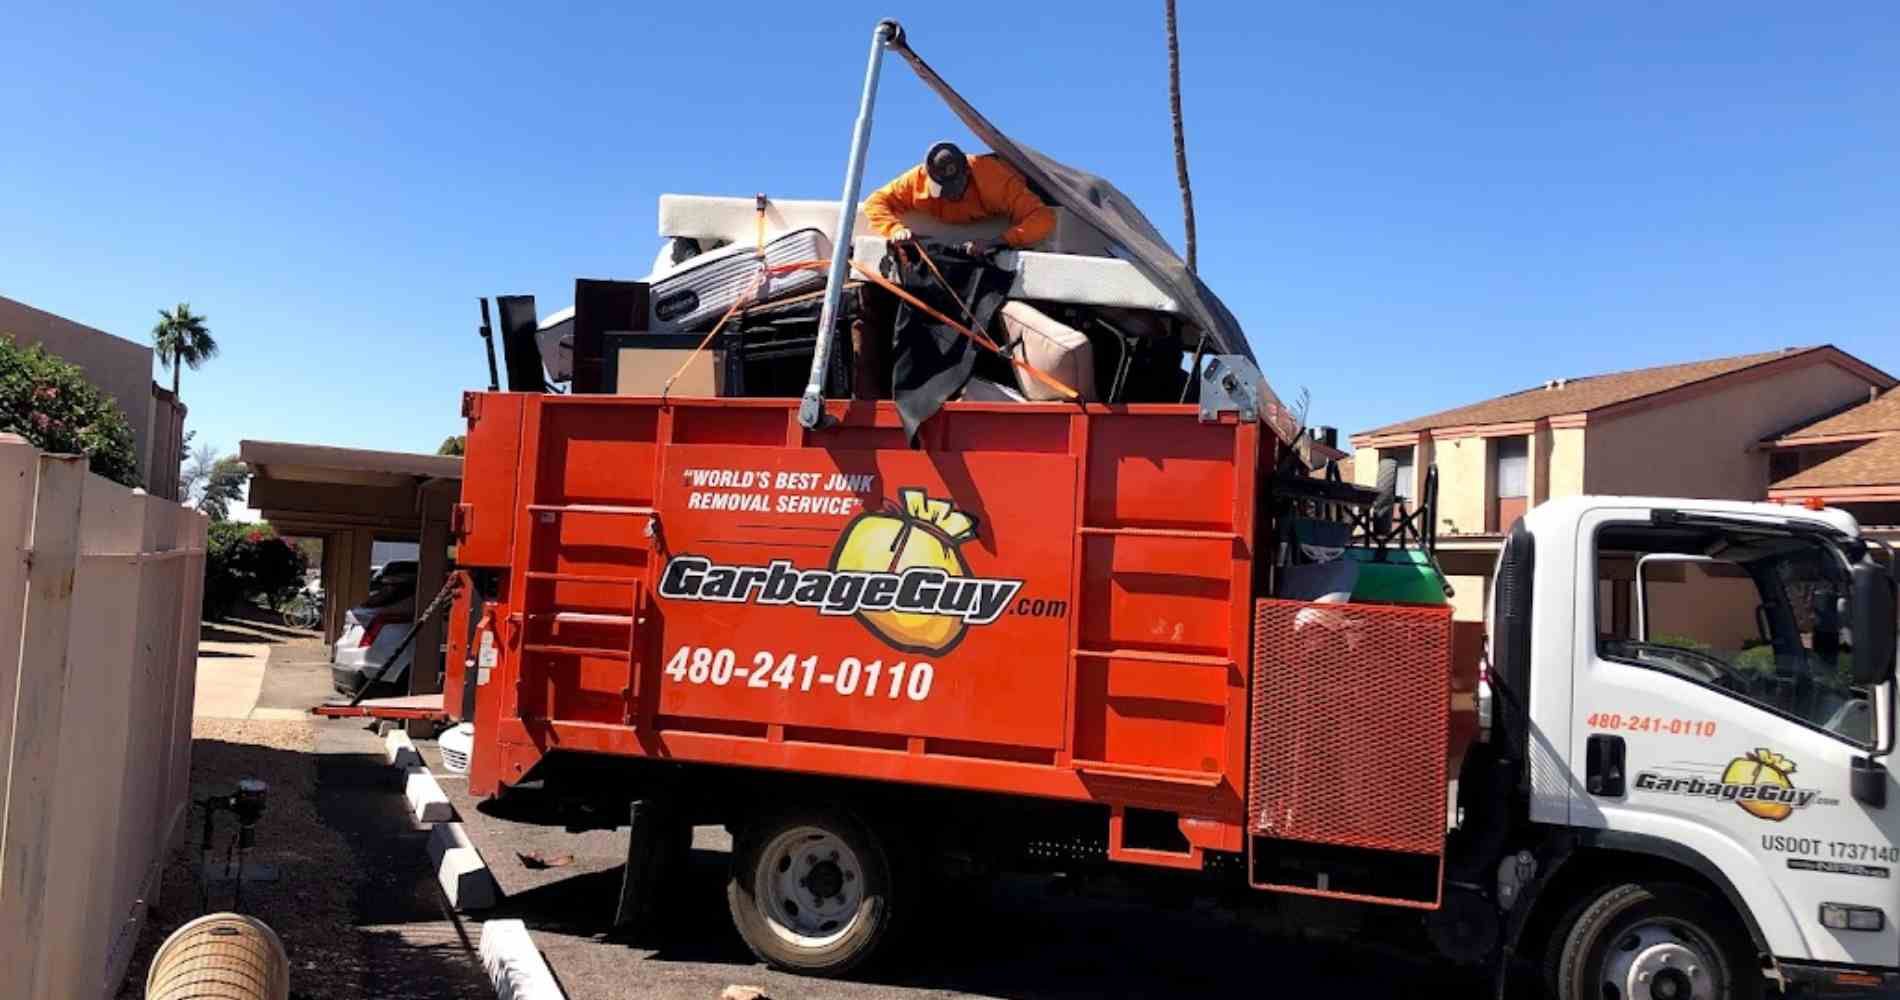 #1 for Furniture Removal in Peoria, AZ With Over 1200 5-Star Reviews!